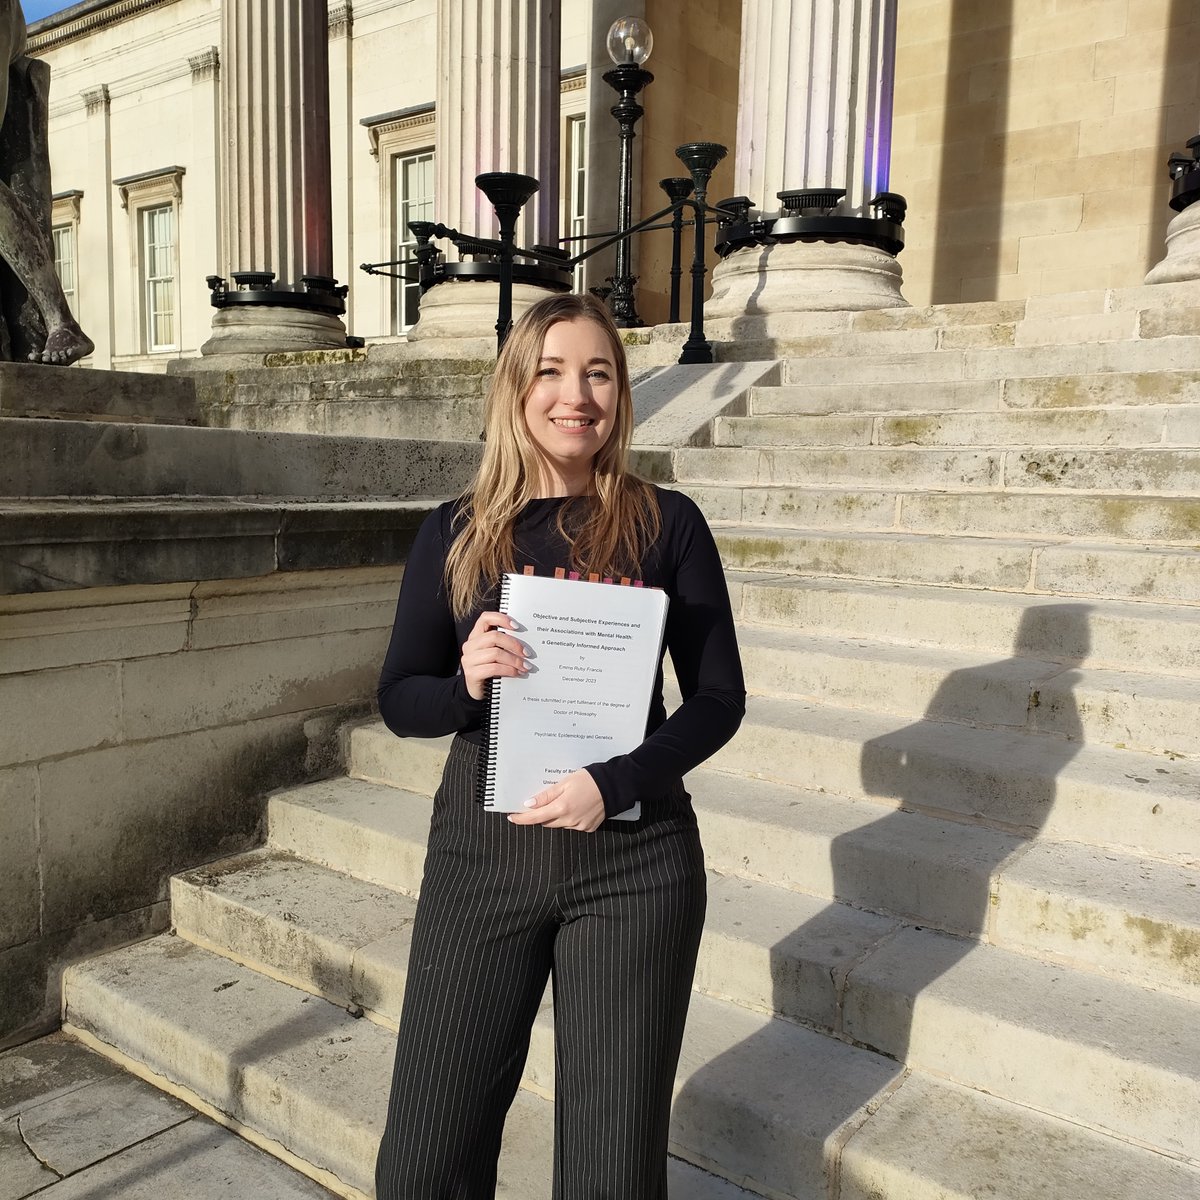 It's now Dr Francis! On Friday, I passed my PhD with no corrections @ucl Thank you to my supervisors @jessiebaldwin, Jean-Baptiste Pingault & @AtCMAP for all their support ❤️ Grateful to my examiners Barbara Maughan & @EmilyMidouhas for an enjoyable viva! #FirstGen #WomenInSTEM